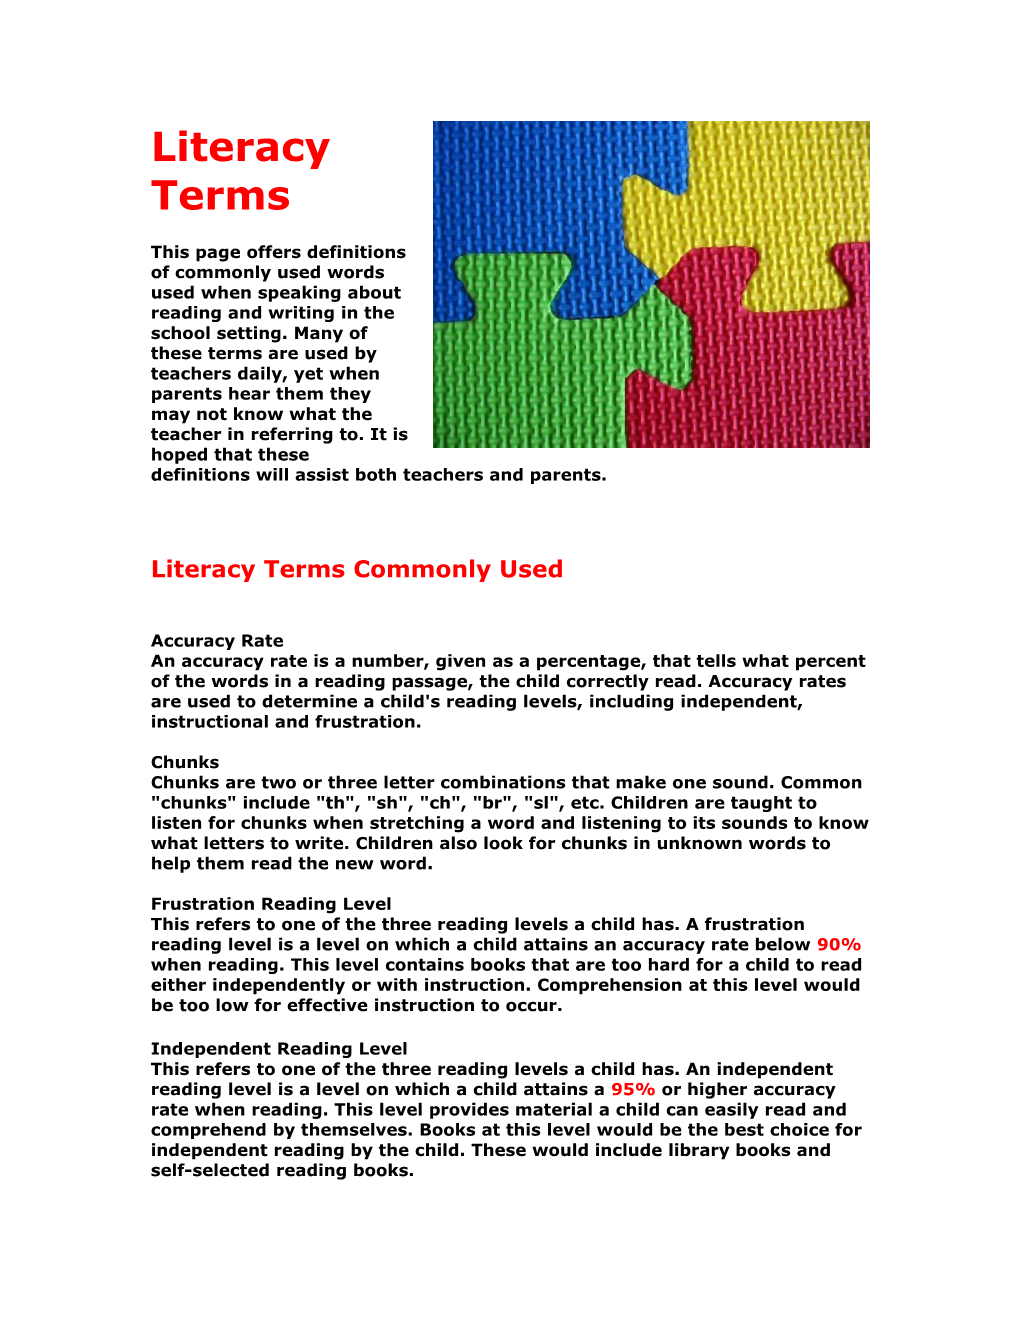 Literacy Terms Commonly Used